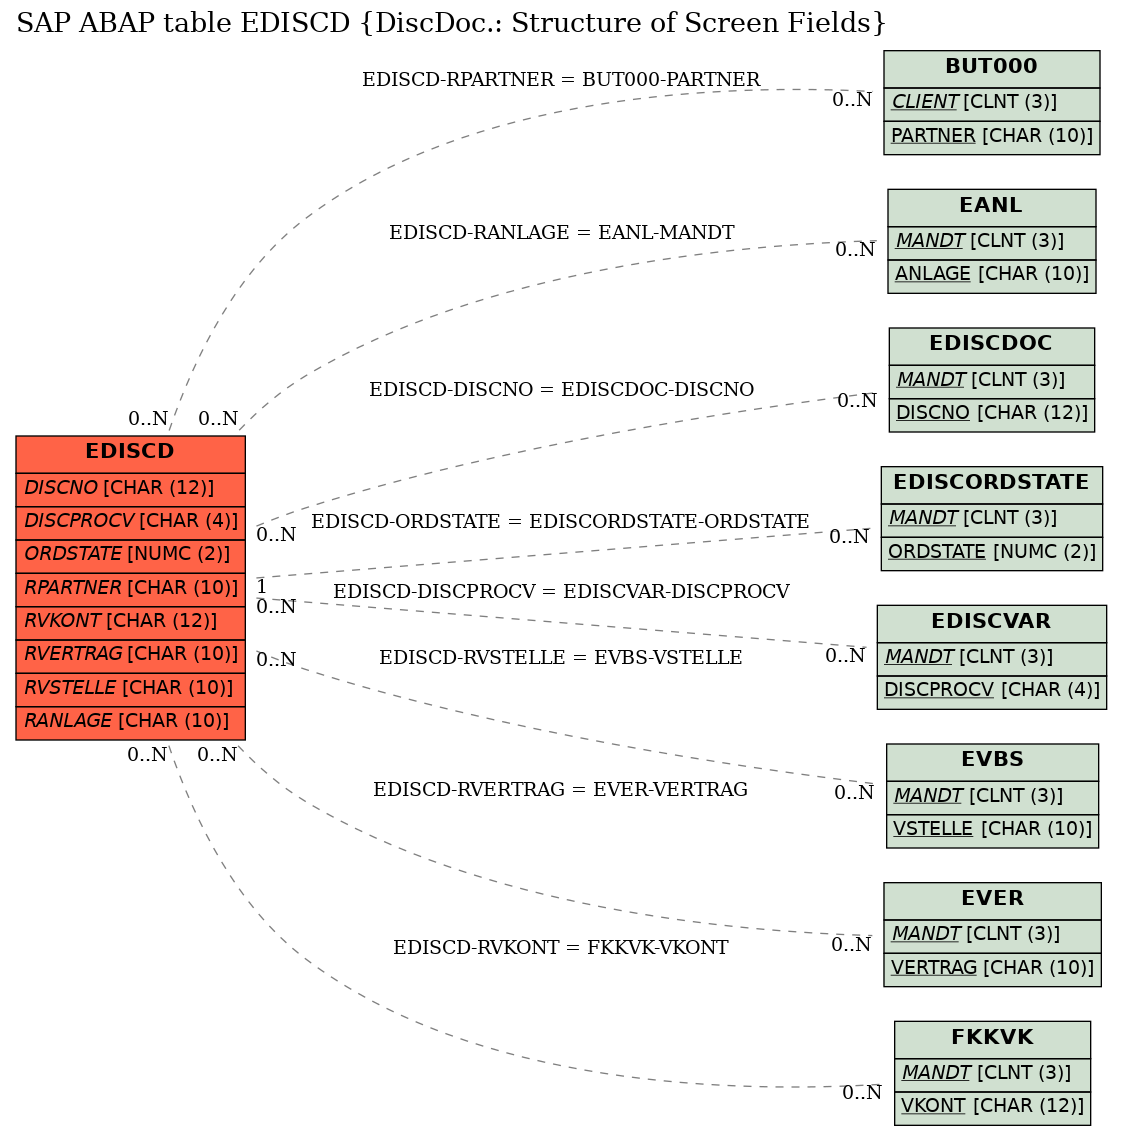 E-R Diagram for table EDISCD (DiscDoc.: Structure of Screen Fields)